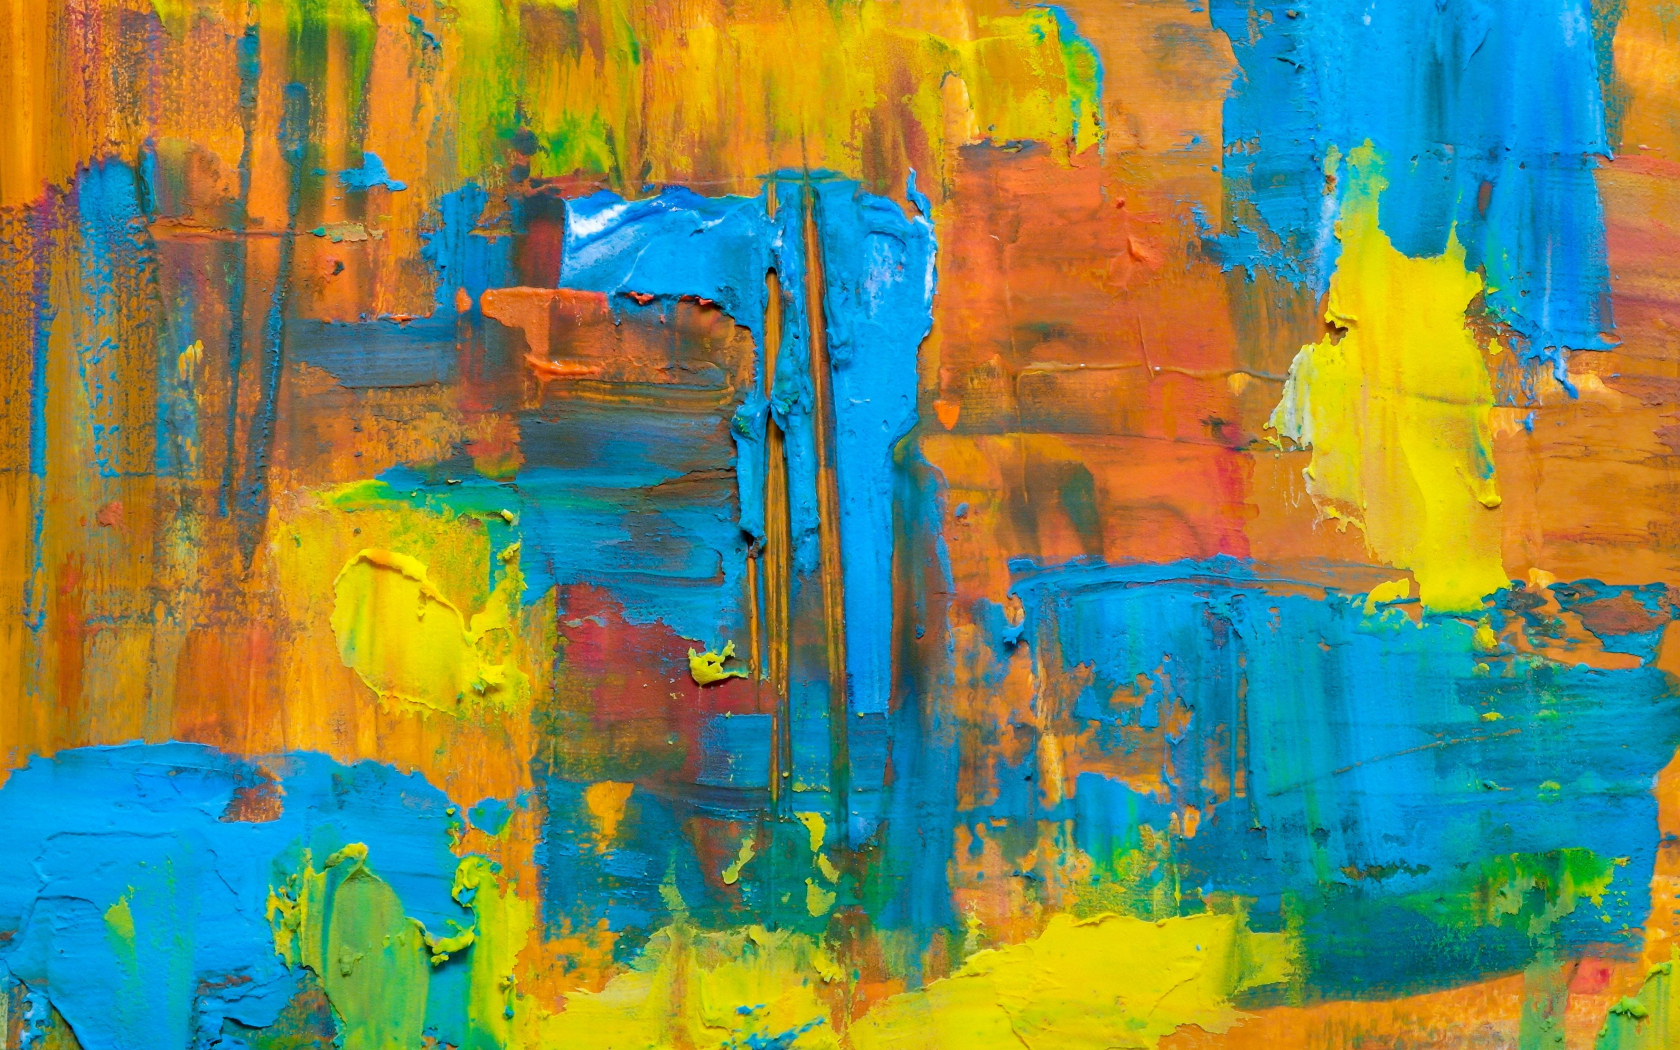 Download wallpaper 1680x1050 abstraction, art, painting, colorful, 16: ...